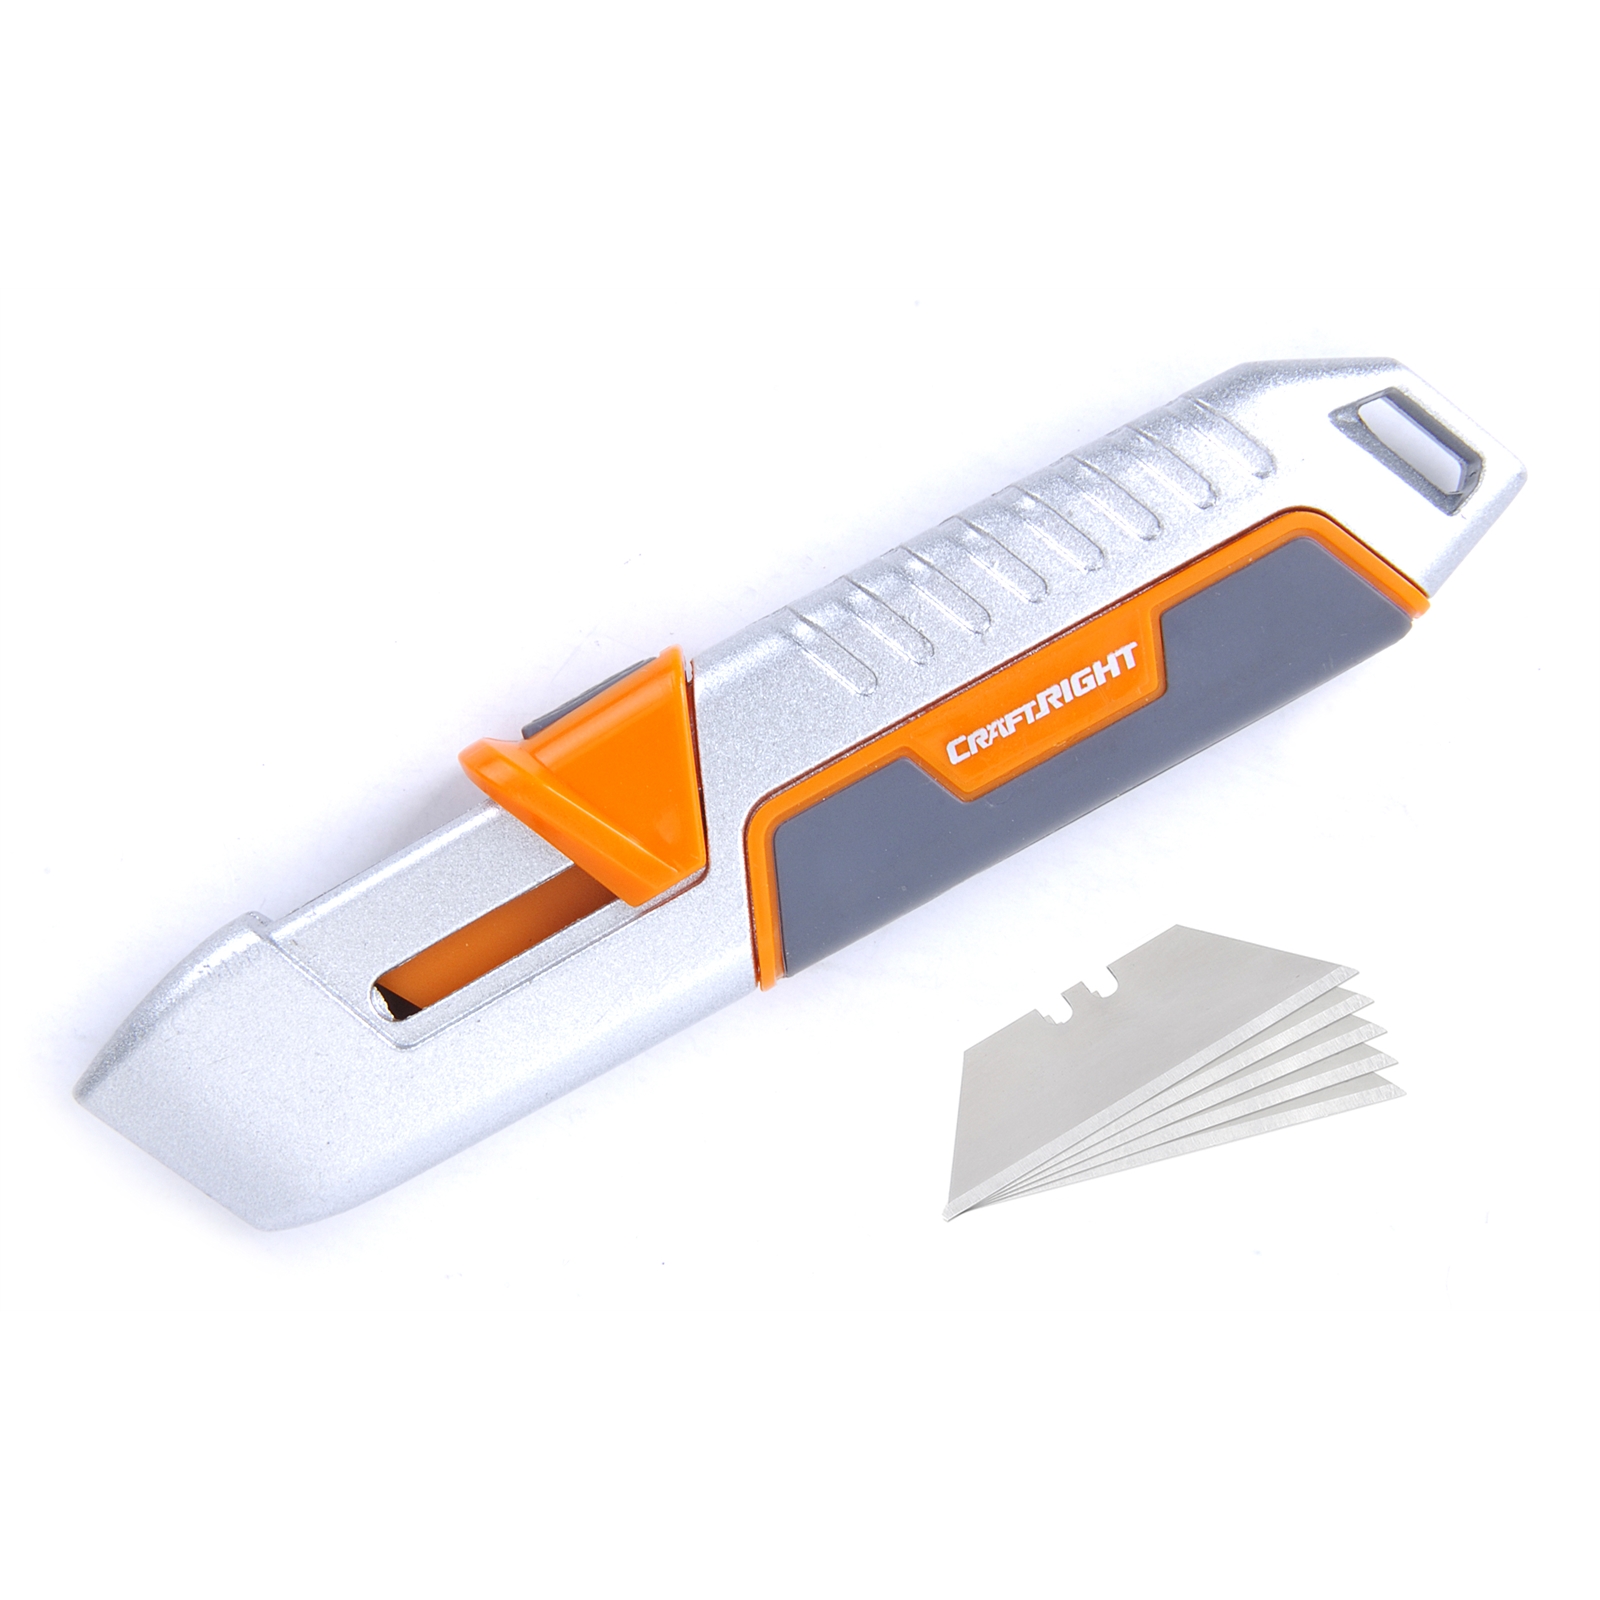 Craftright Retracting Utility Knife